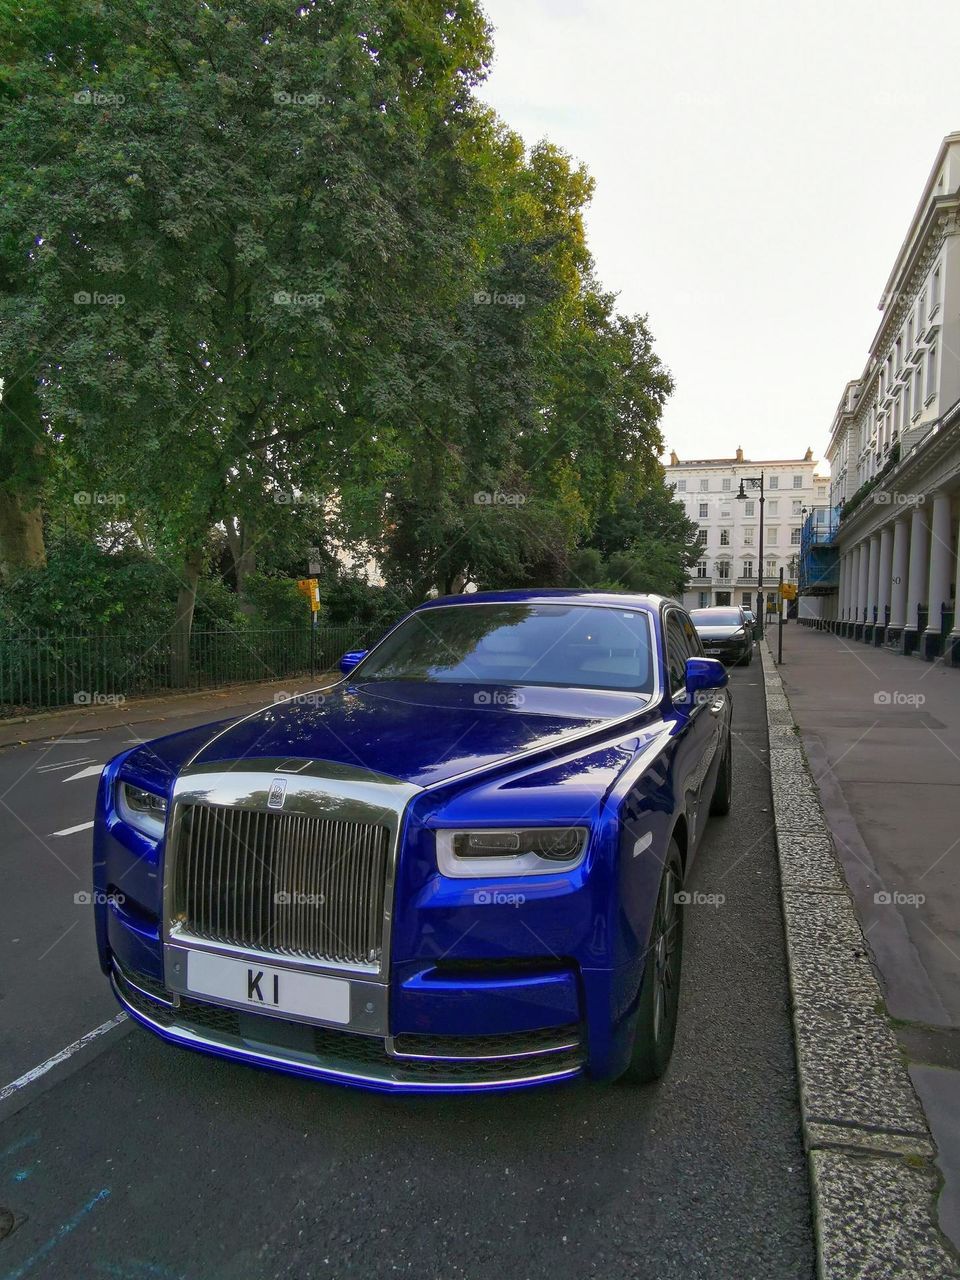 Rolls-Royce cars with souls...